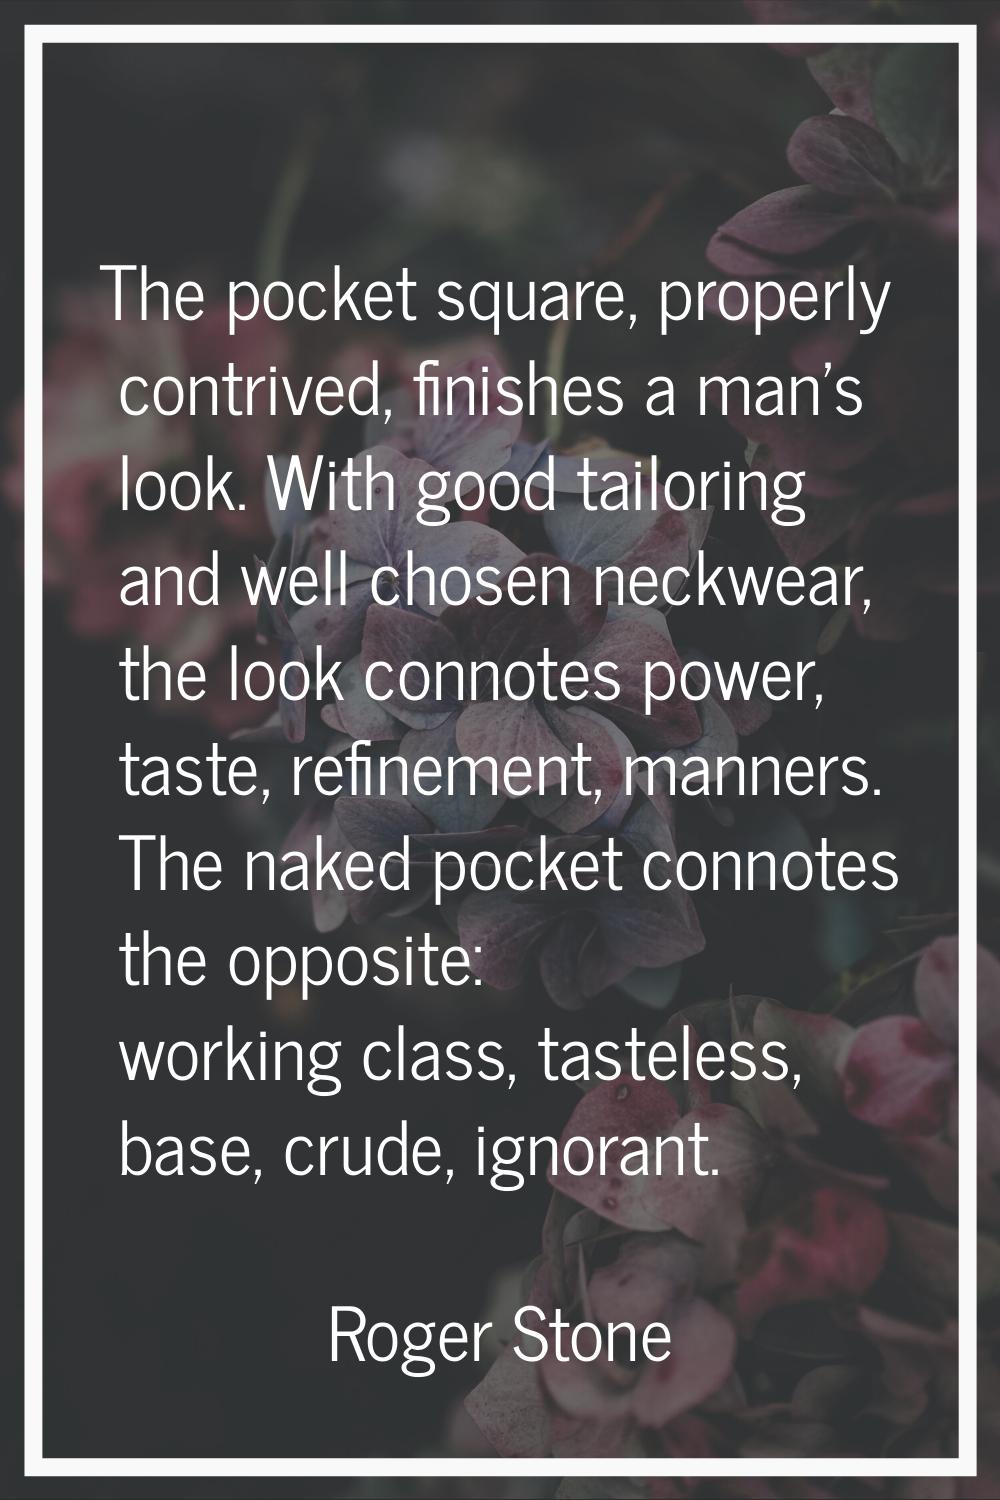 The pocket square, properly contrived, finishes a man's look. With good tailoring and well chosen n